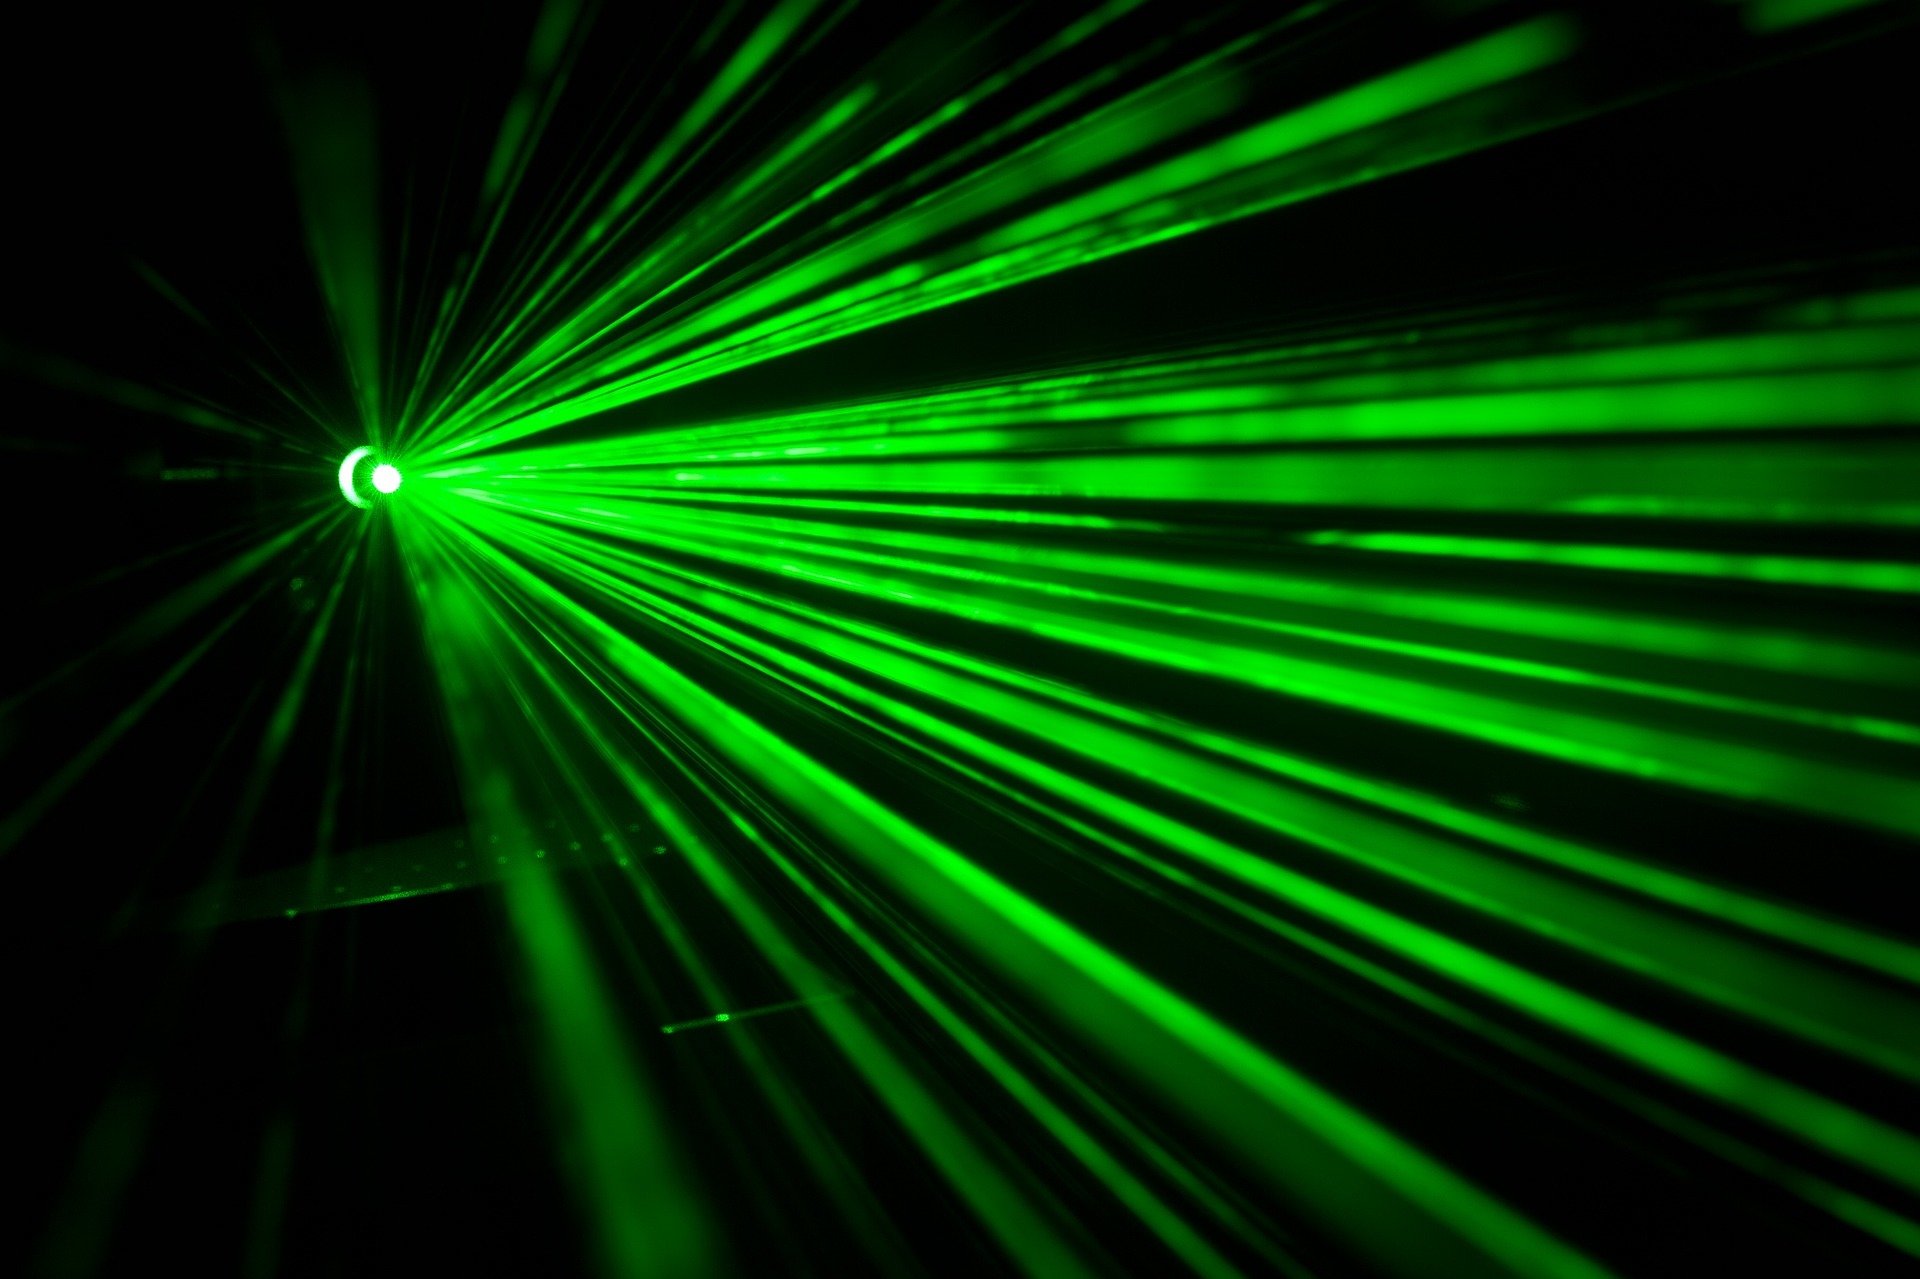 New ultrafast measurement technique shows how lasers start from chaos